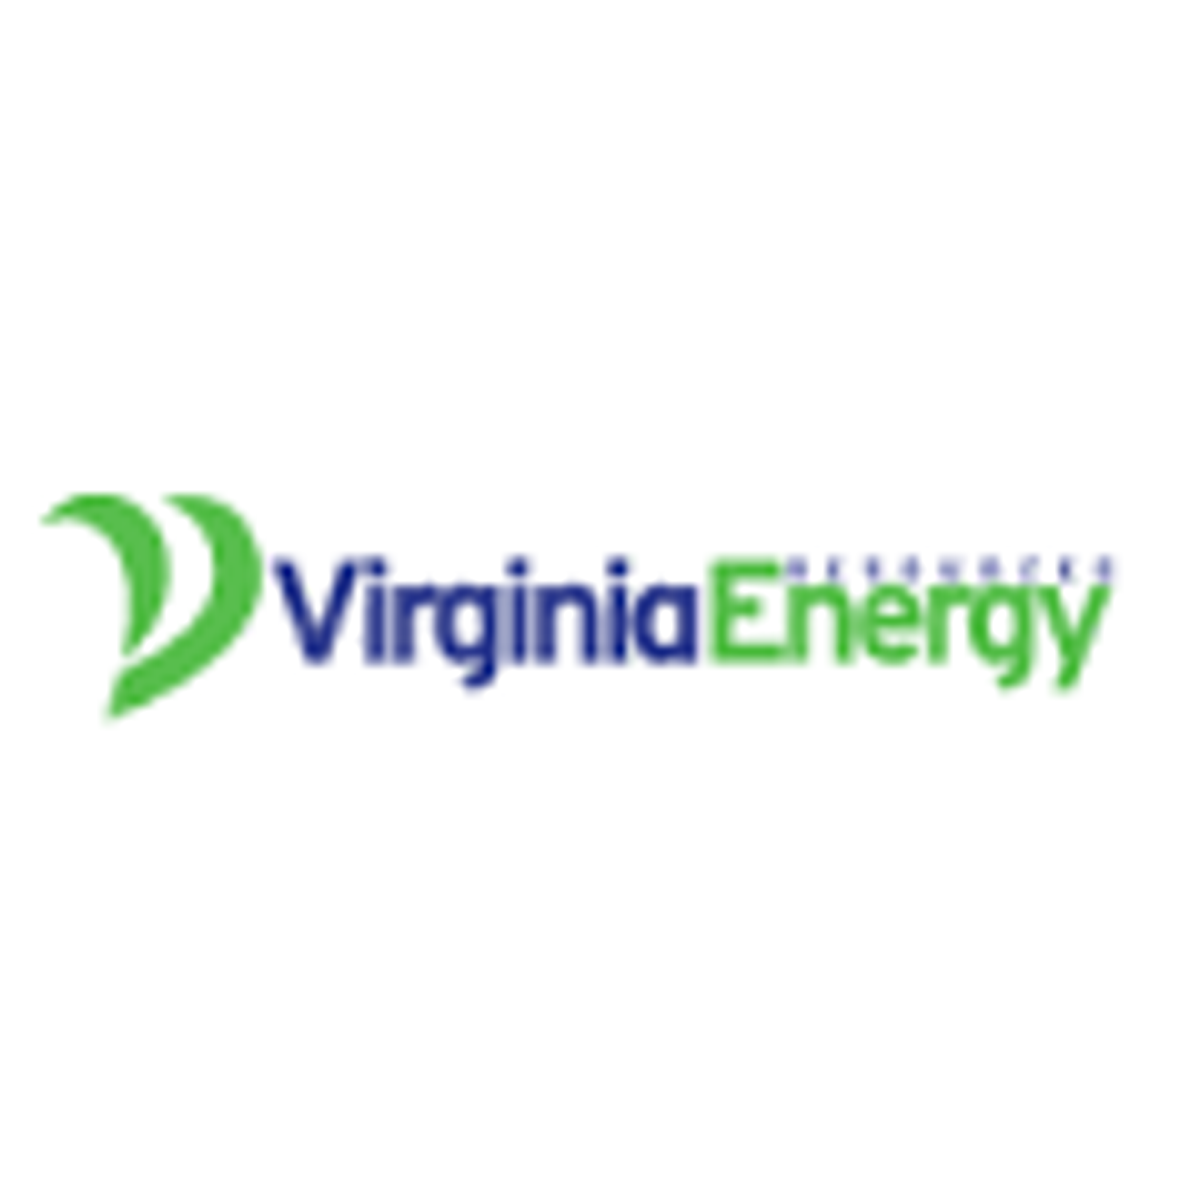 Virginia Energy Resources Announces Closing of Private Placement in Connection with Plan of Arrangement with Consolidated Uranium